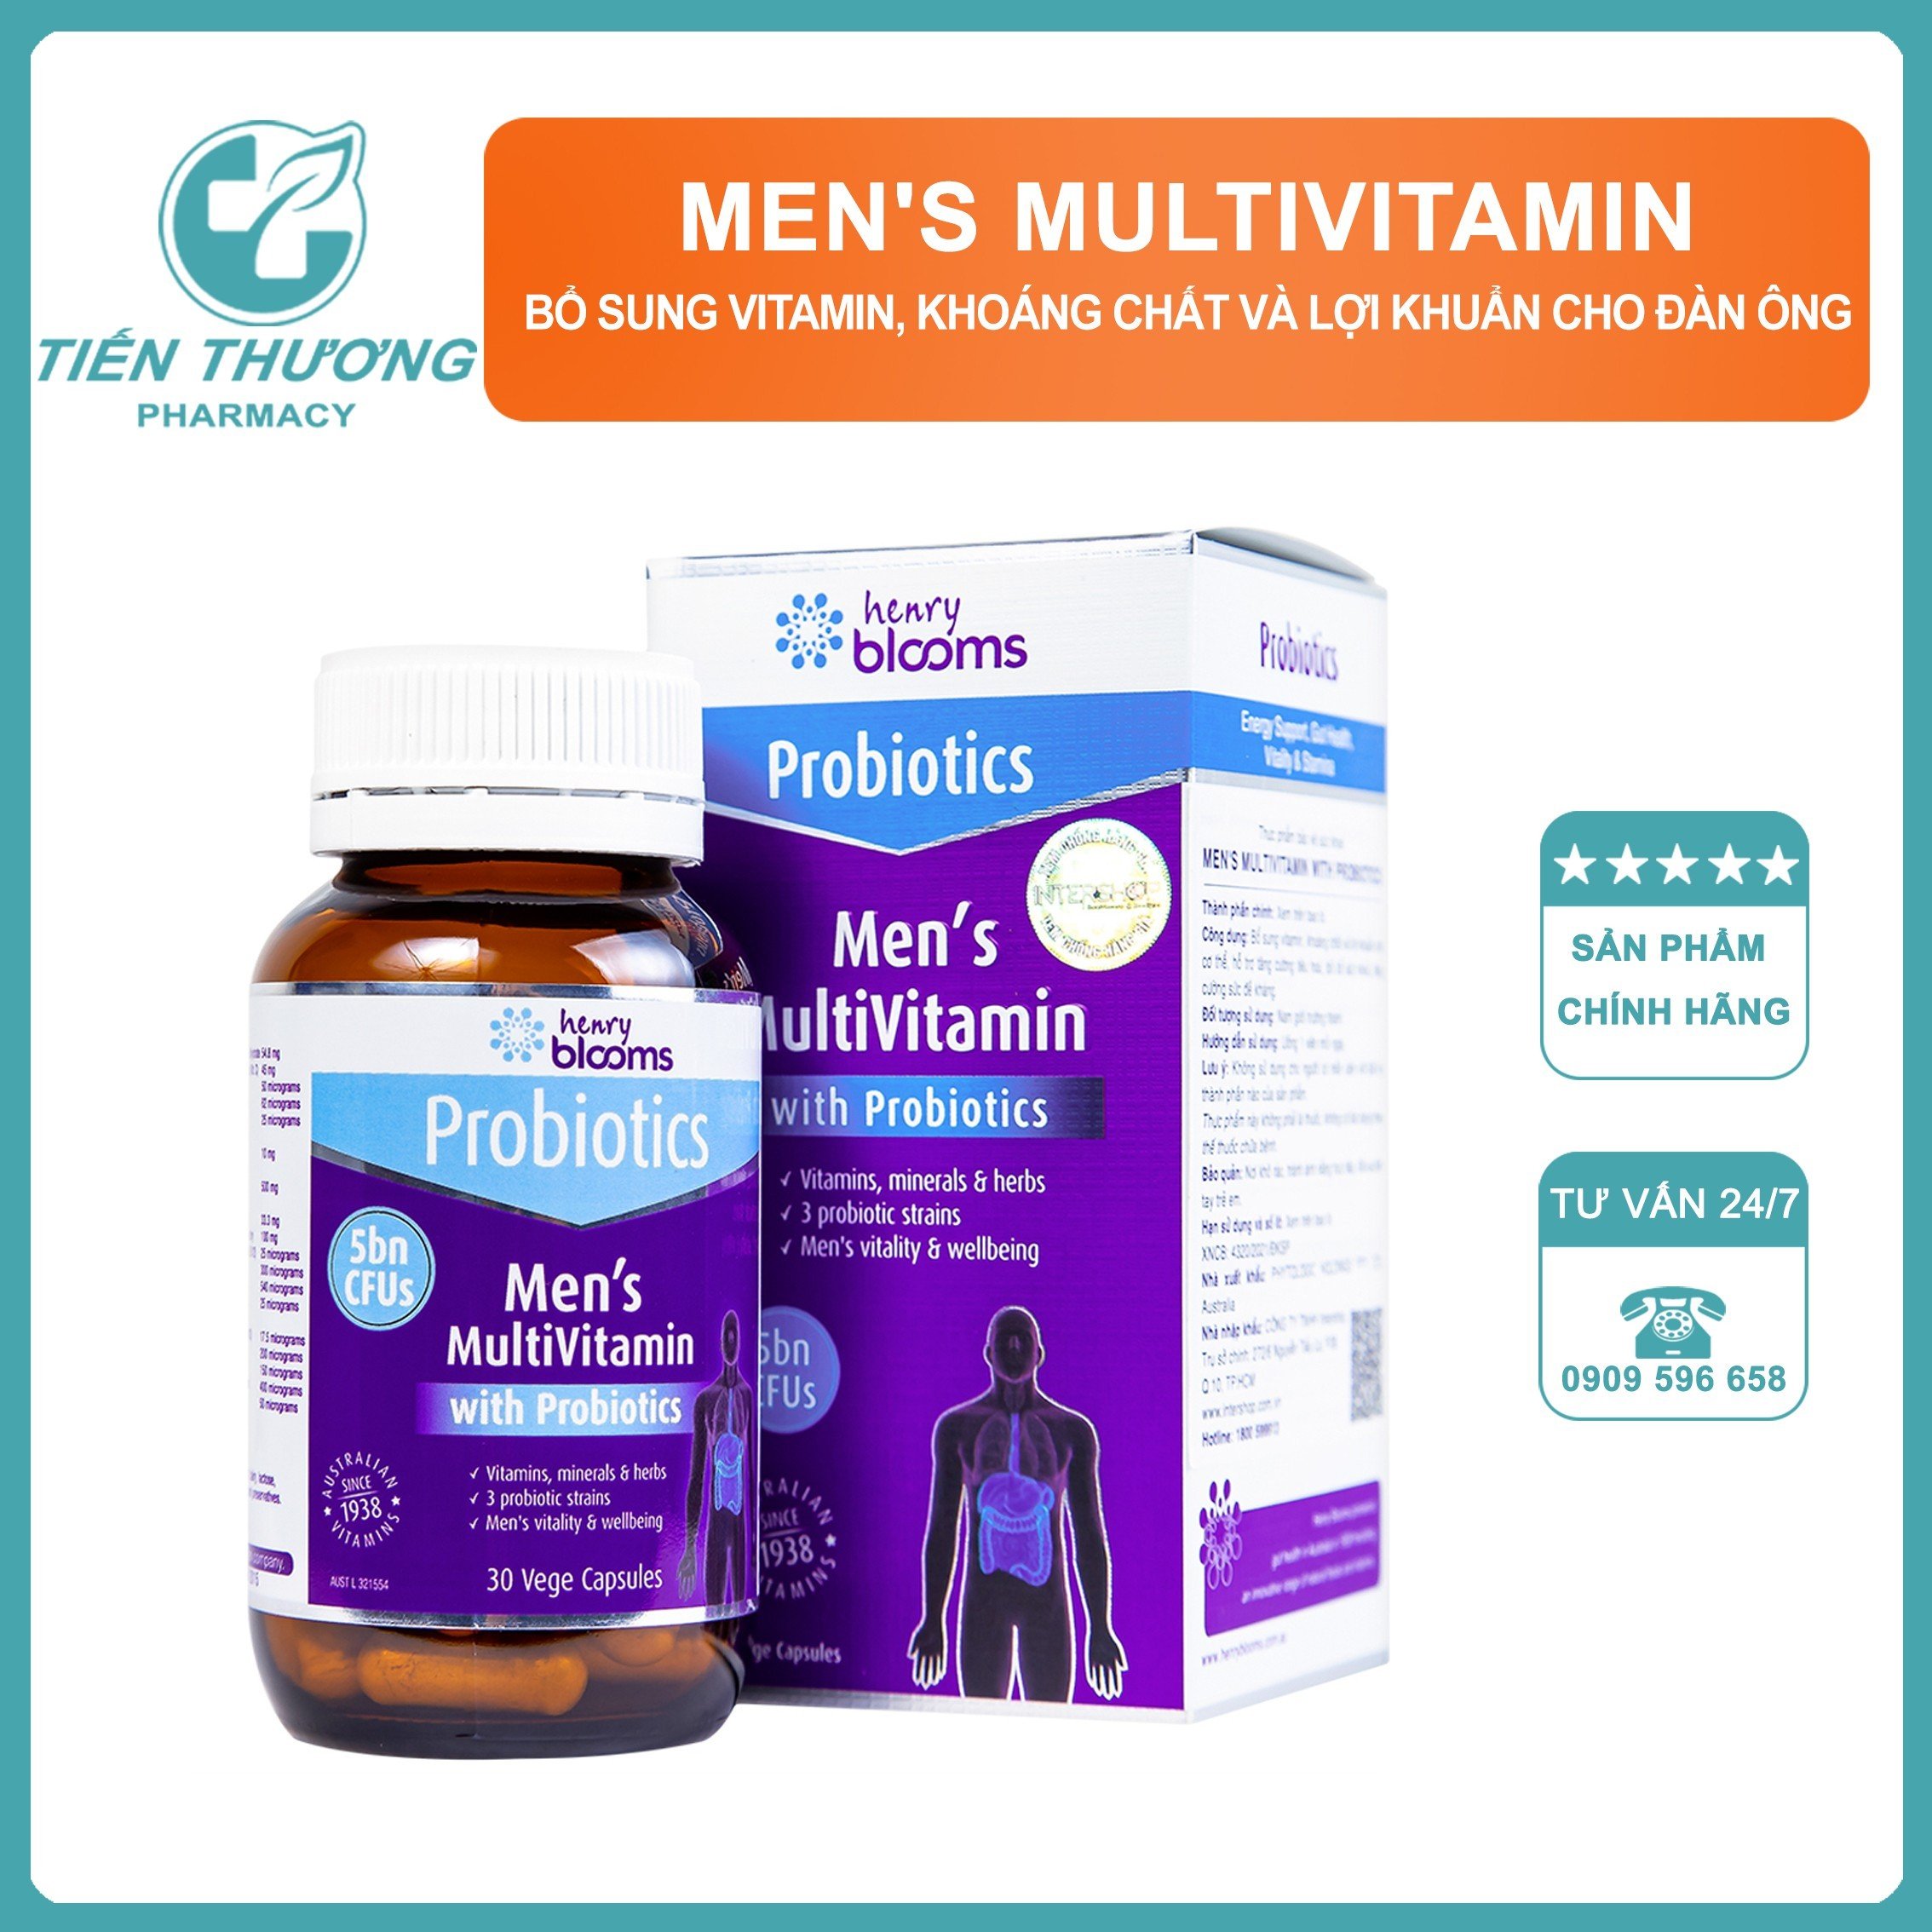 Men s Multivitamin With Probiotics Henry Blooms contains vitamins